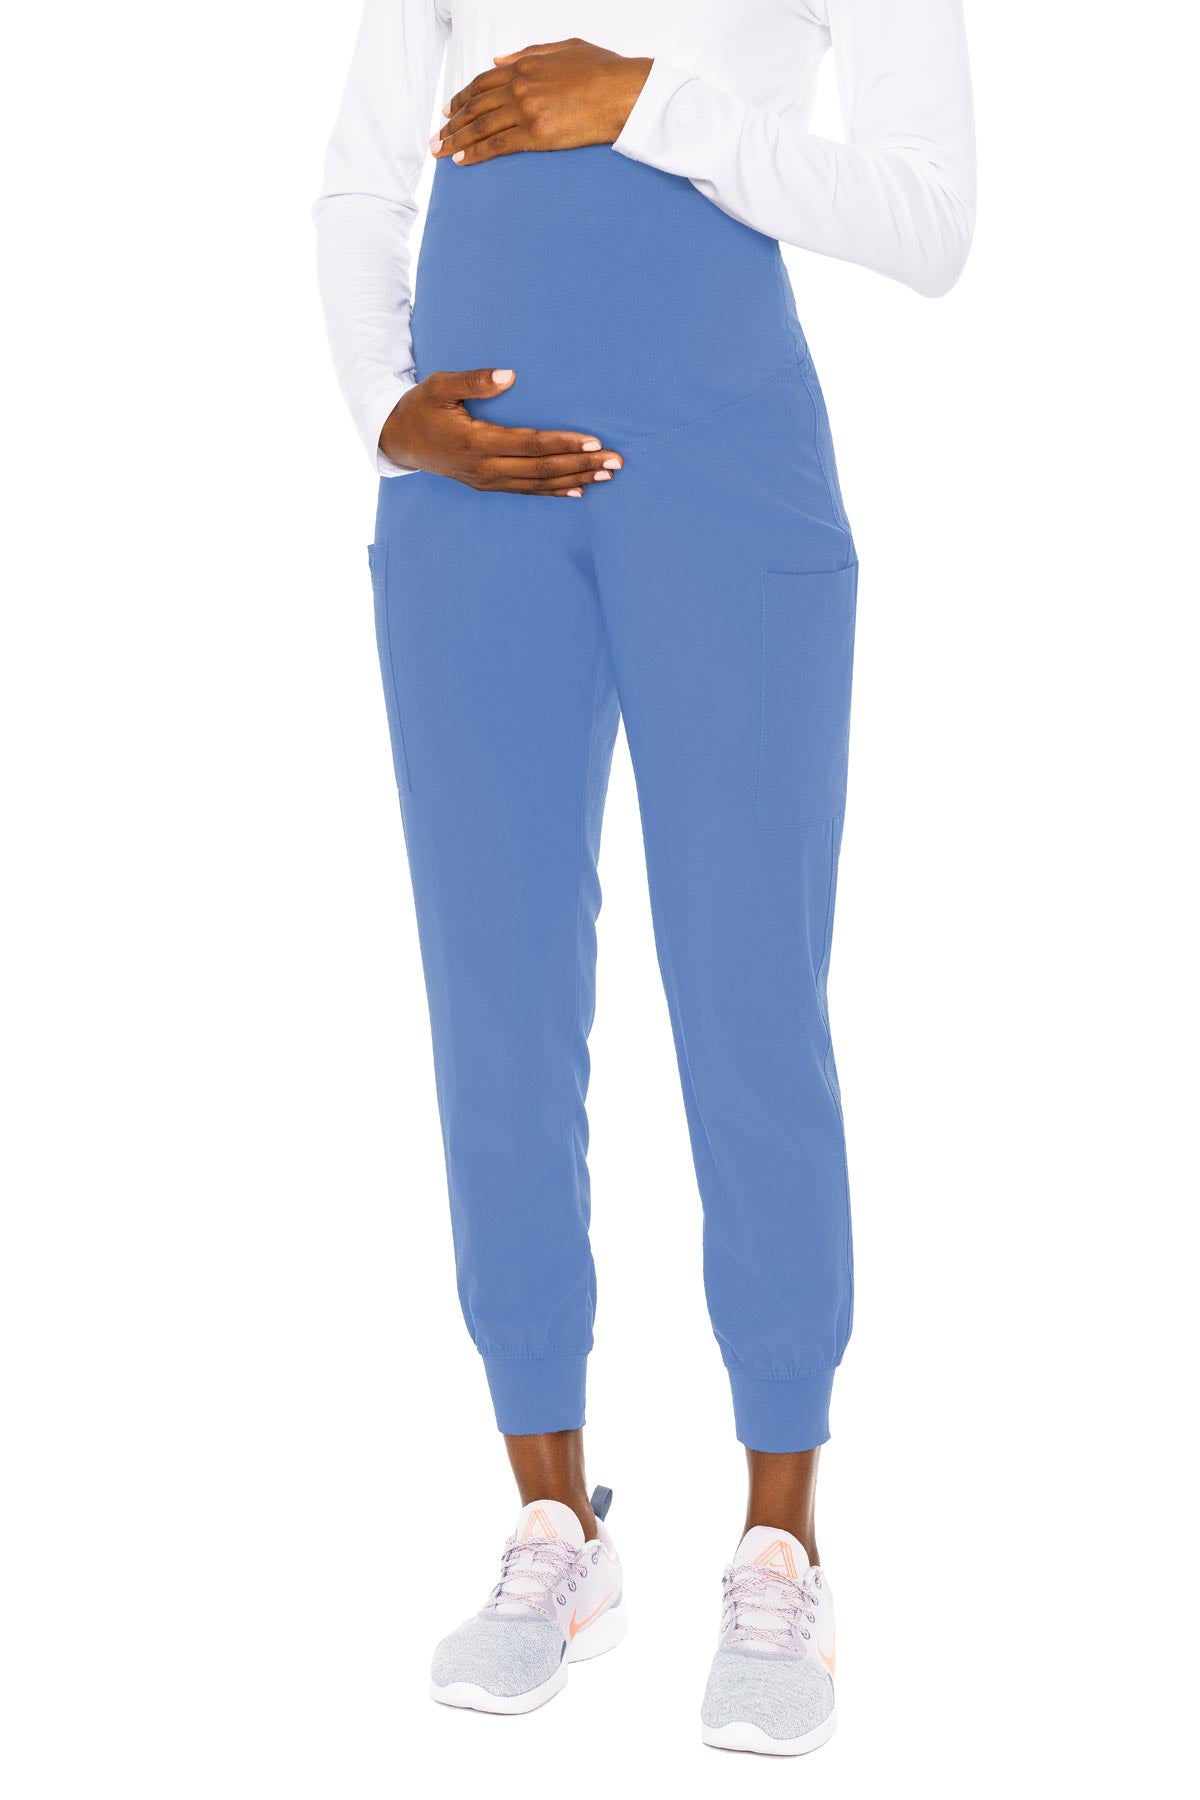 Med Couture Plus One Maternity Cargo Jogger Scrub Pants